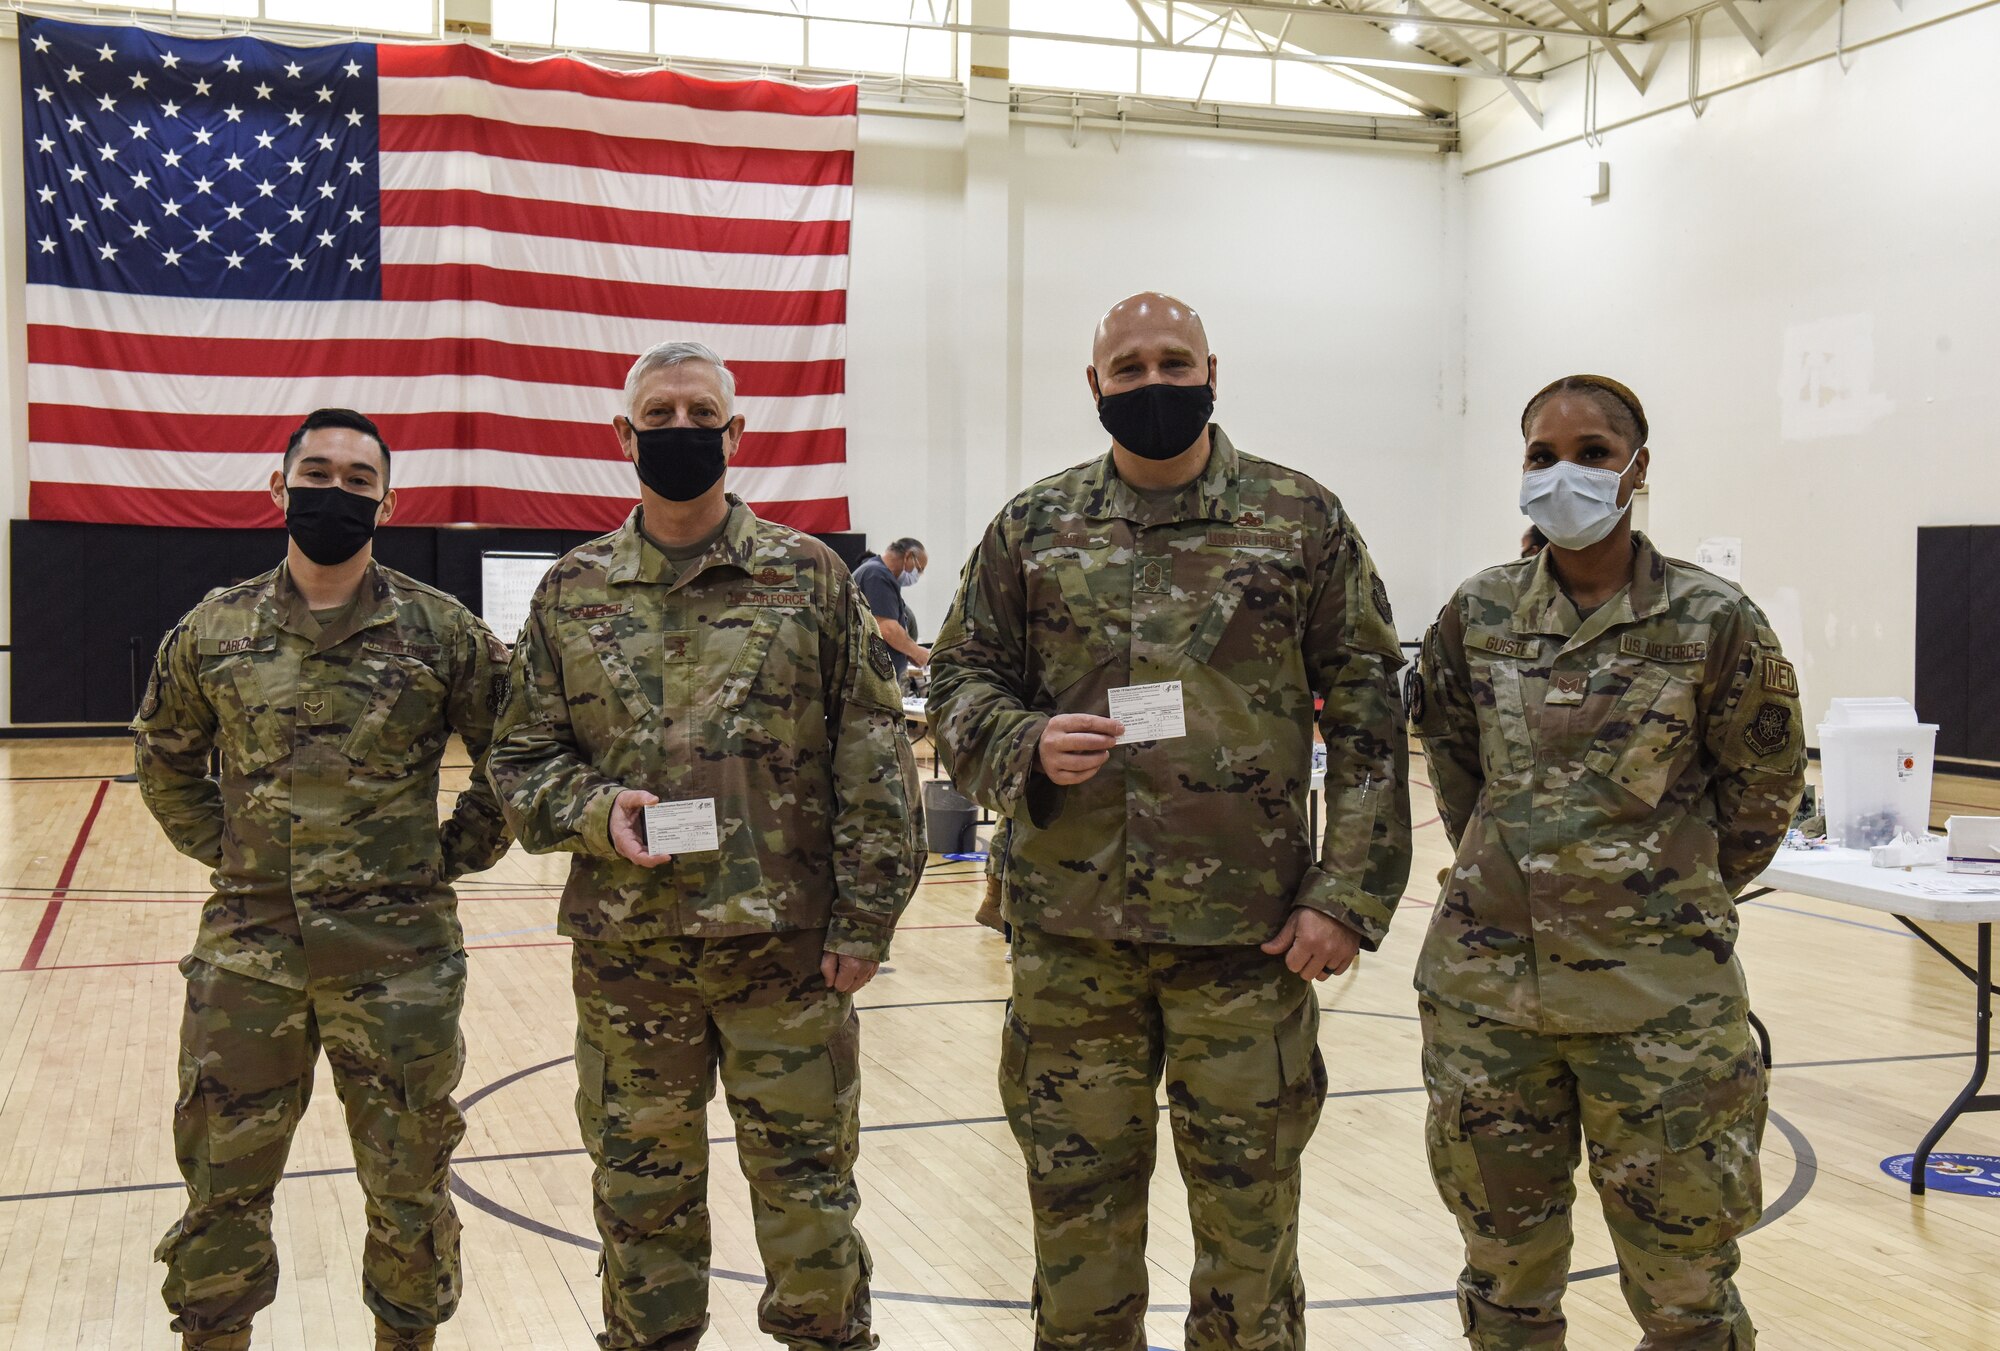 U.S. Air Force Maj. Gen. Mark Camerer, USAF Expeditionary Center commander, and USAF Expeditionary Command Chief, Chief Master Sgt. Anthony W. Green, after receiving the COVID-19 vaccine at Joint Base McGuire-Dix-Lakehurst, N.J. on January 13, 2021. The Joint Base received its first batch of vaccines December 31, 2020 and has been administering it since. (U.S. Air Force photo by Senior Airman Shay Stuart)